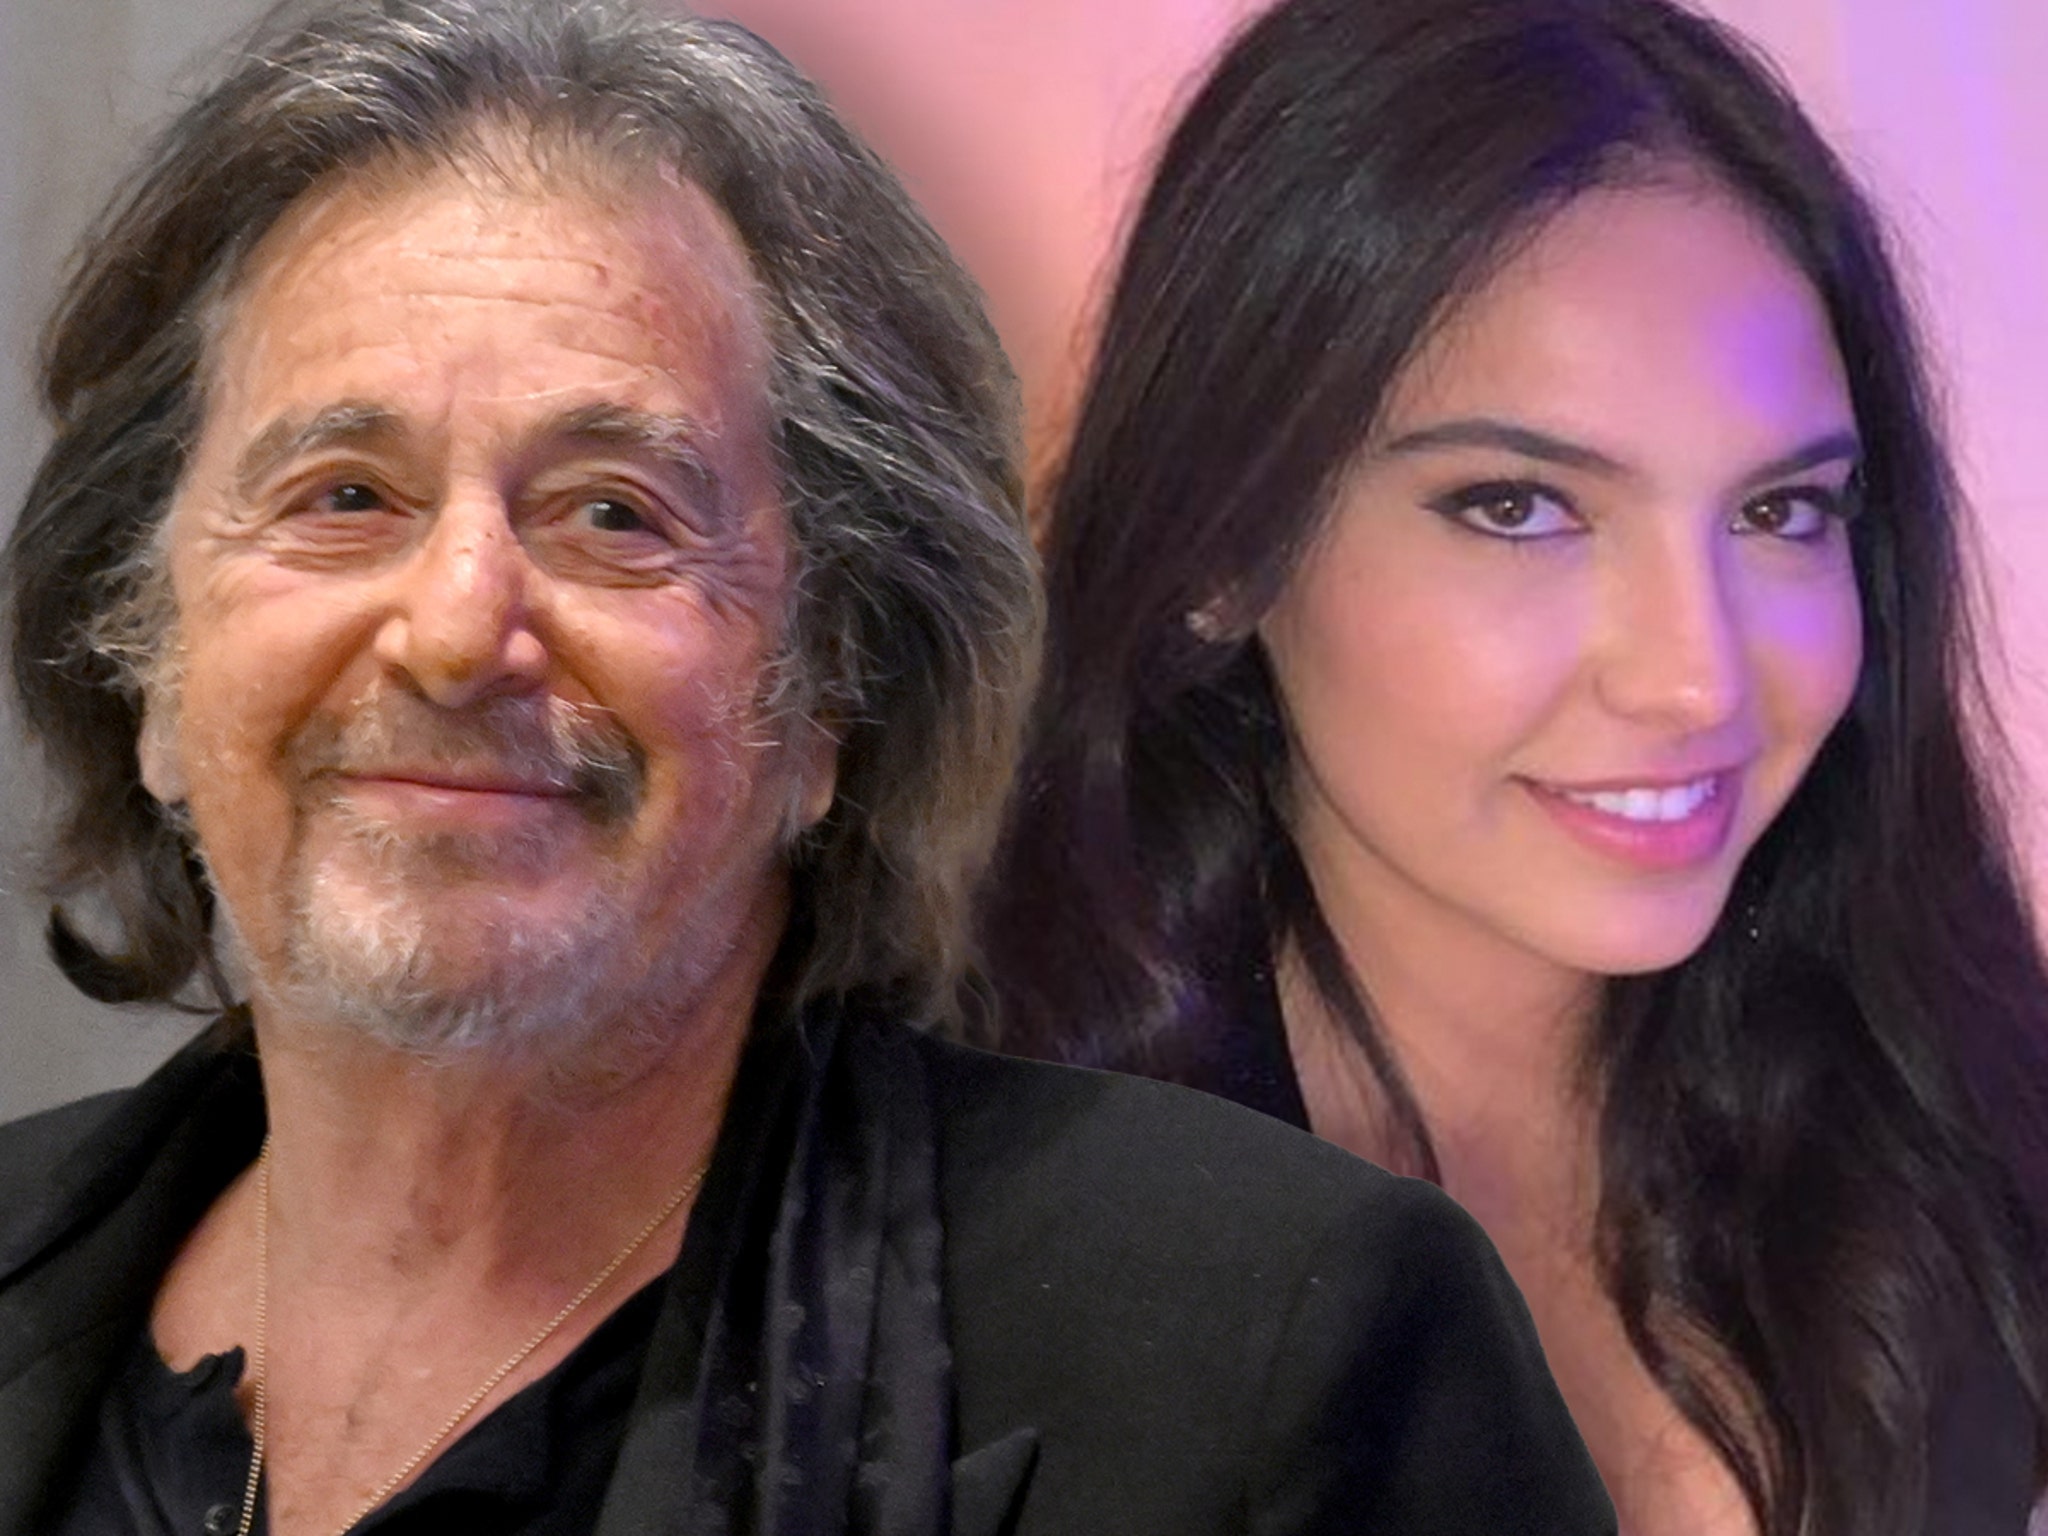 Al Pacino, 83, Surprised By 29-Year-Old Girlfriends Pregnancy picture